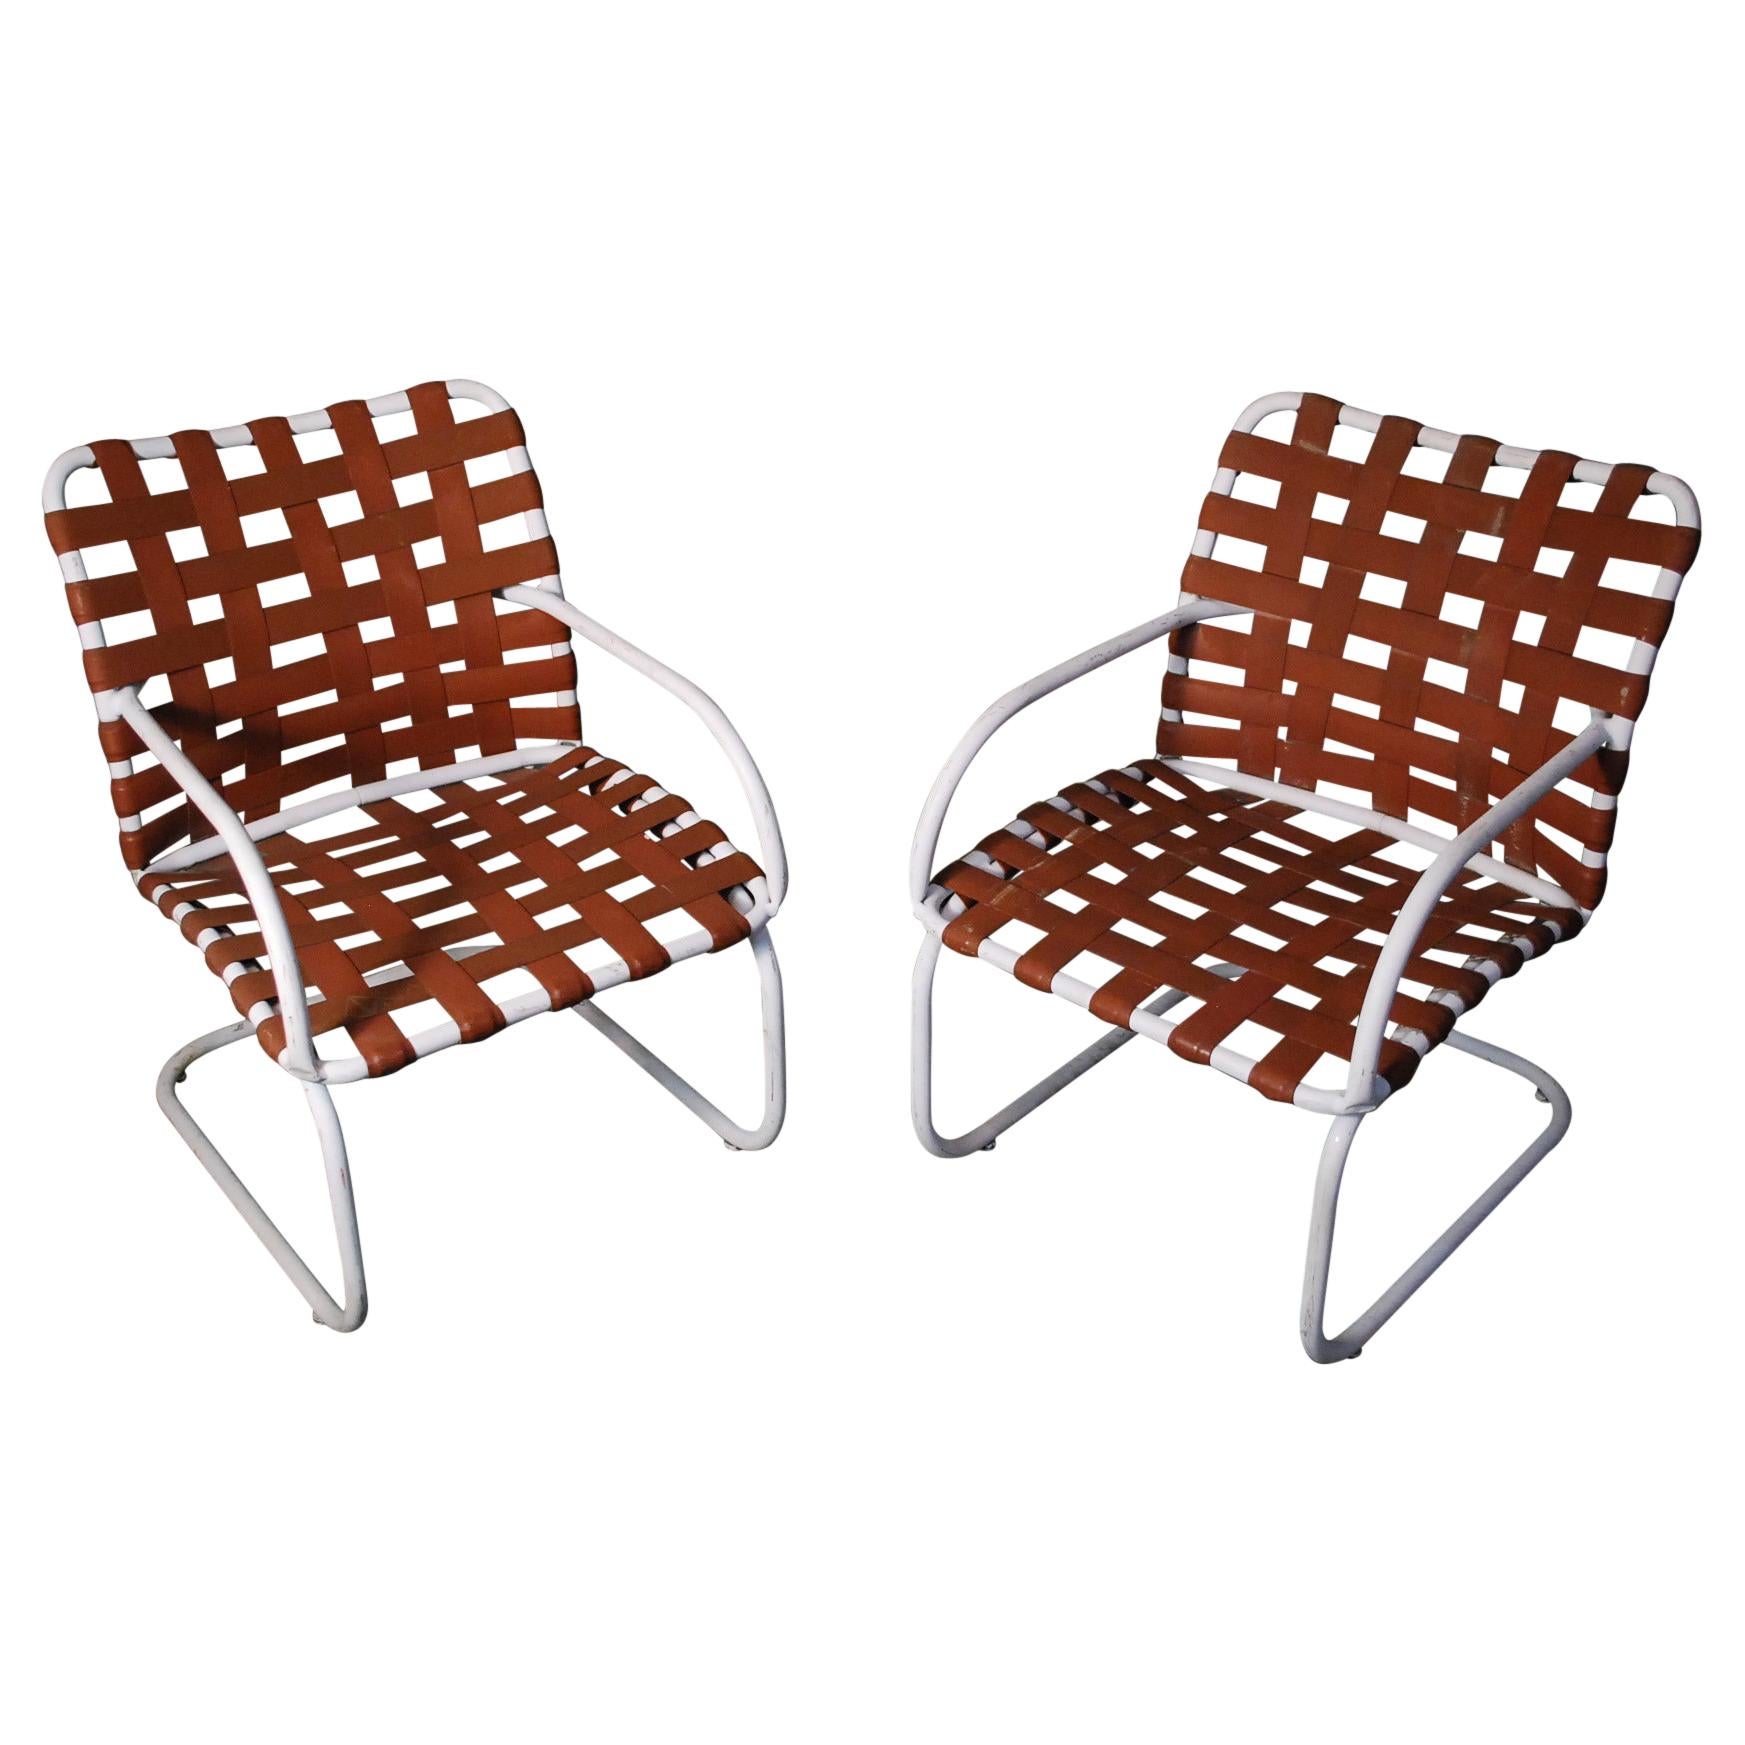 1950's Pair of Cantilevered Outdoor Chairs by Brown Jordan